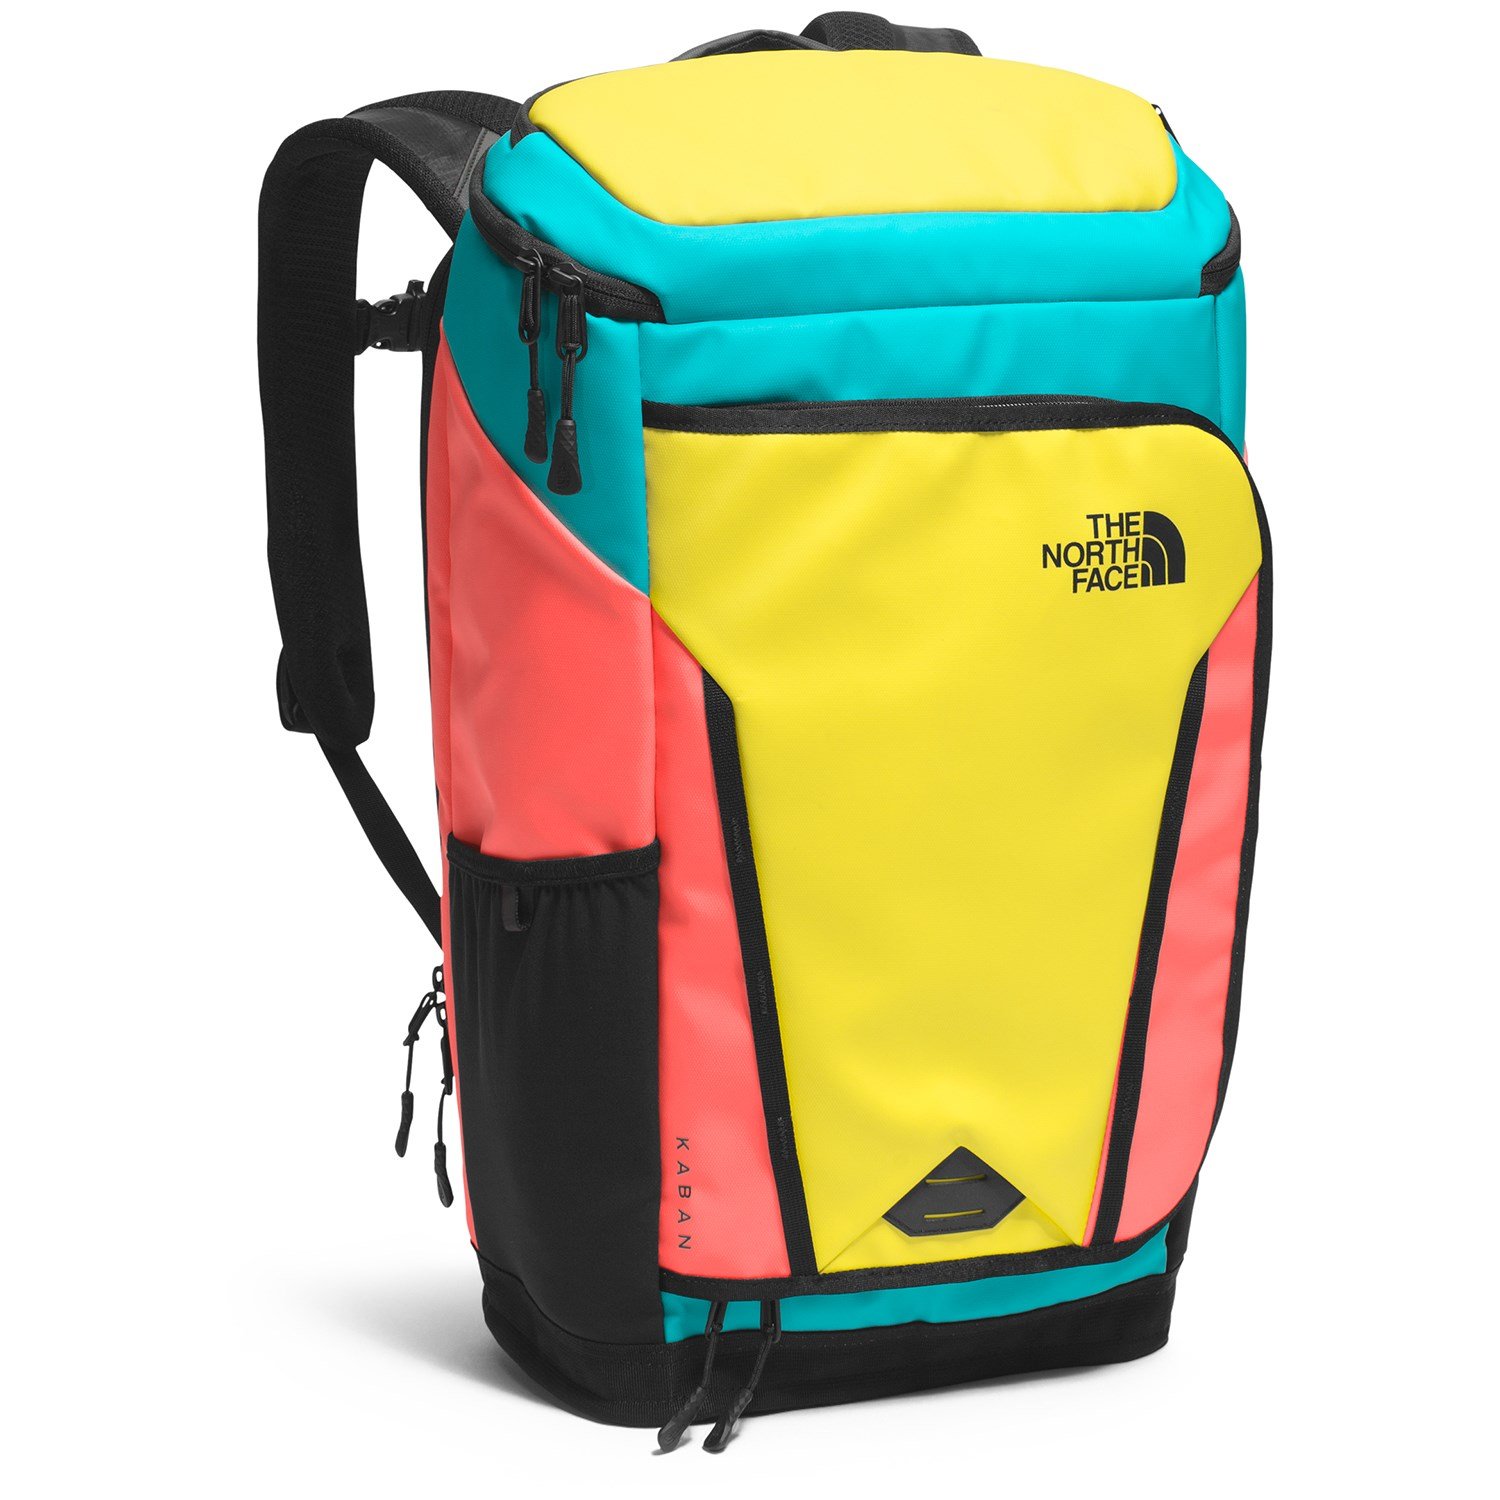 The North Face Kaban Transit Backpack | evo